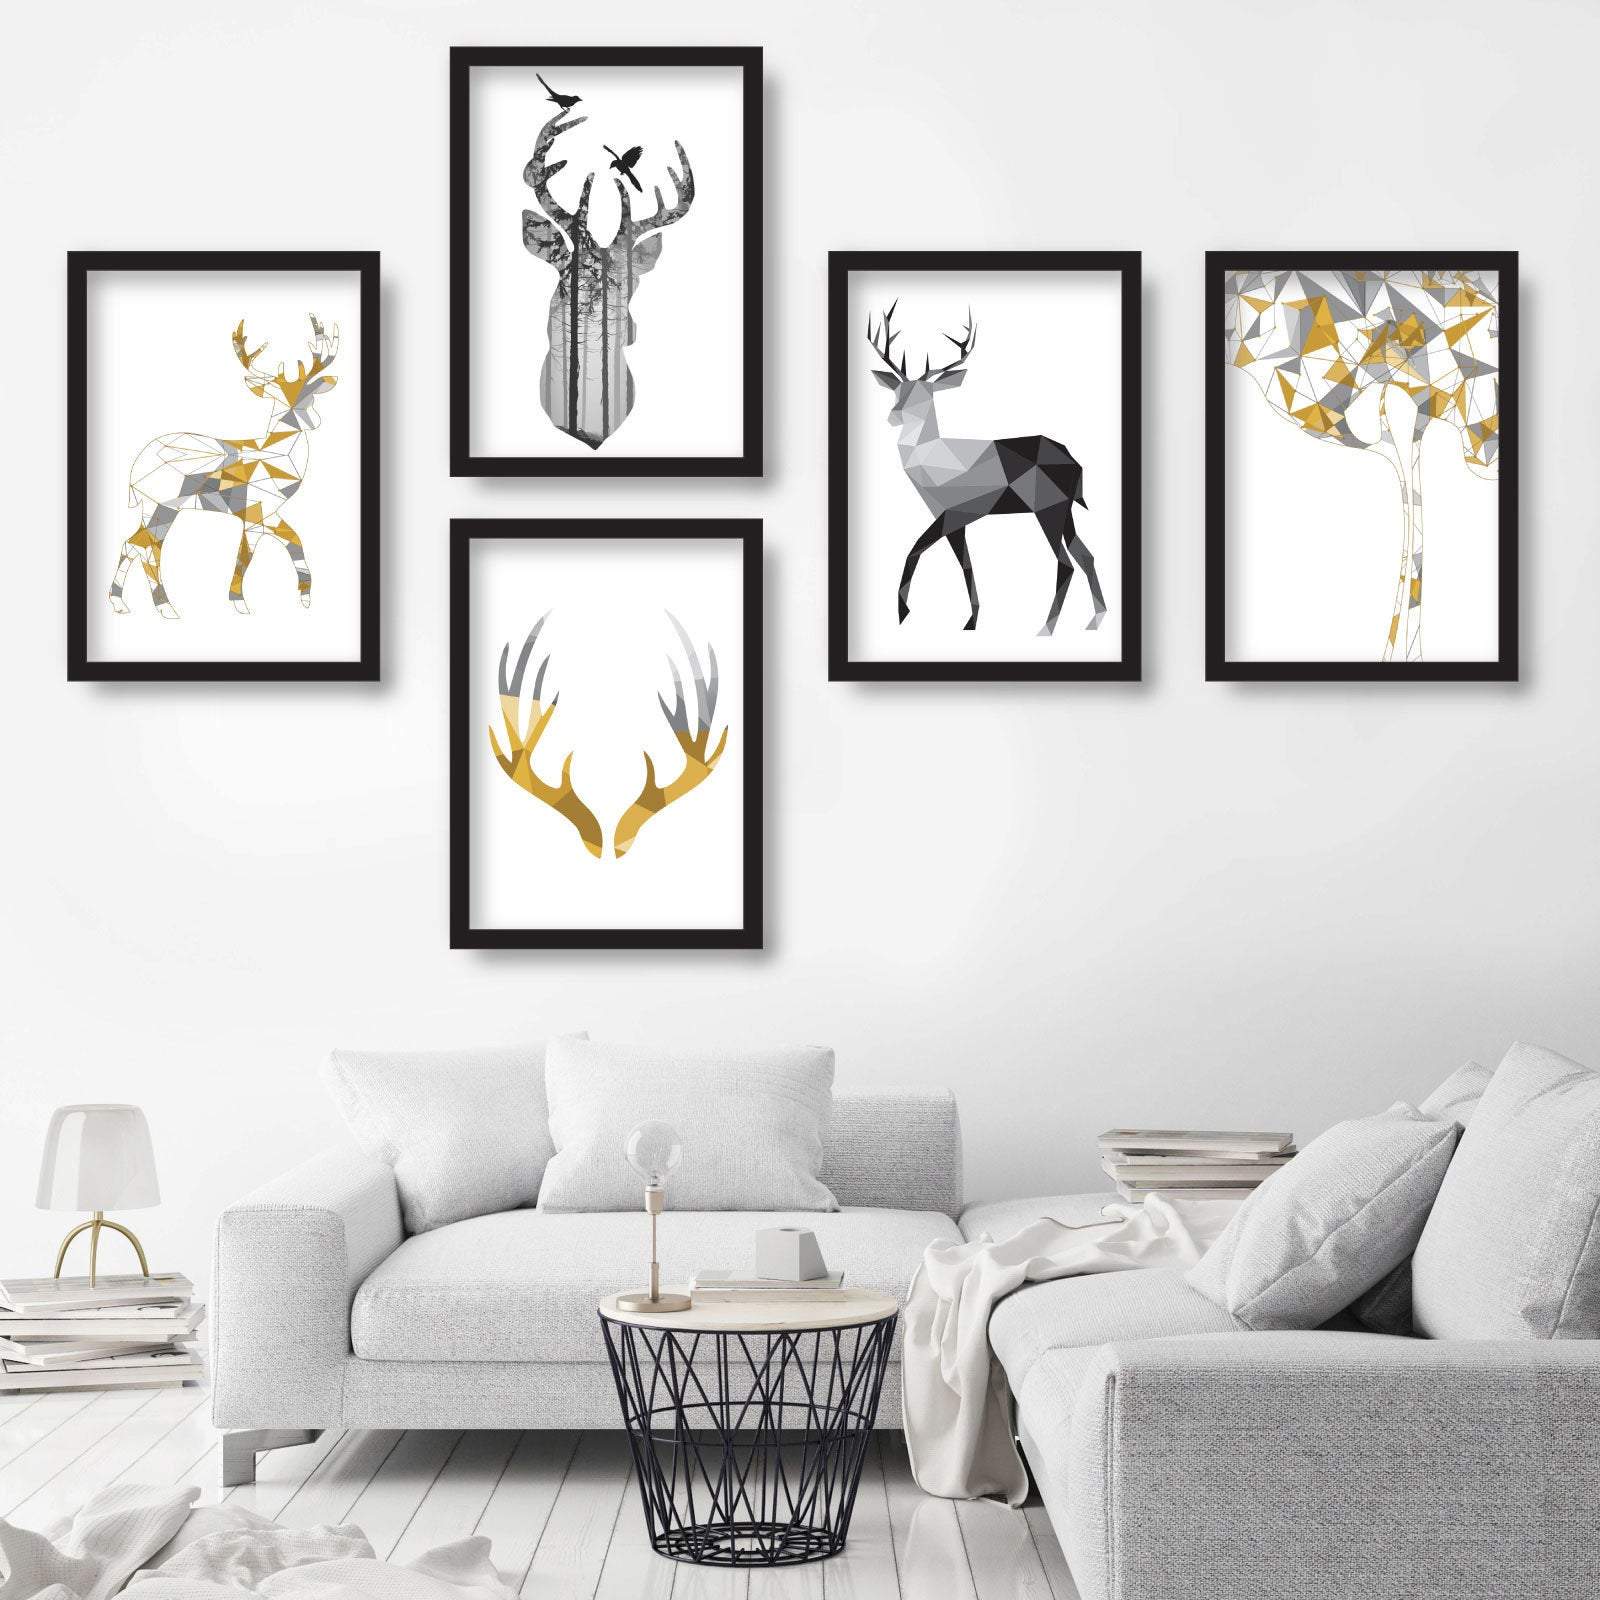 Set of 5 Scandinavian GEOMETRIC Gallery Wall Art Prints STAG deer Yellow & Grey Wall Pictures Posters Artwork